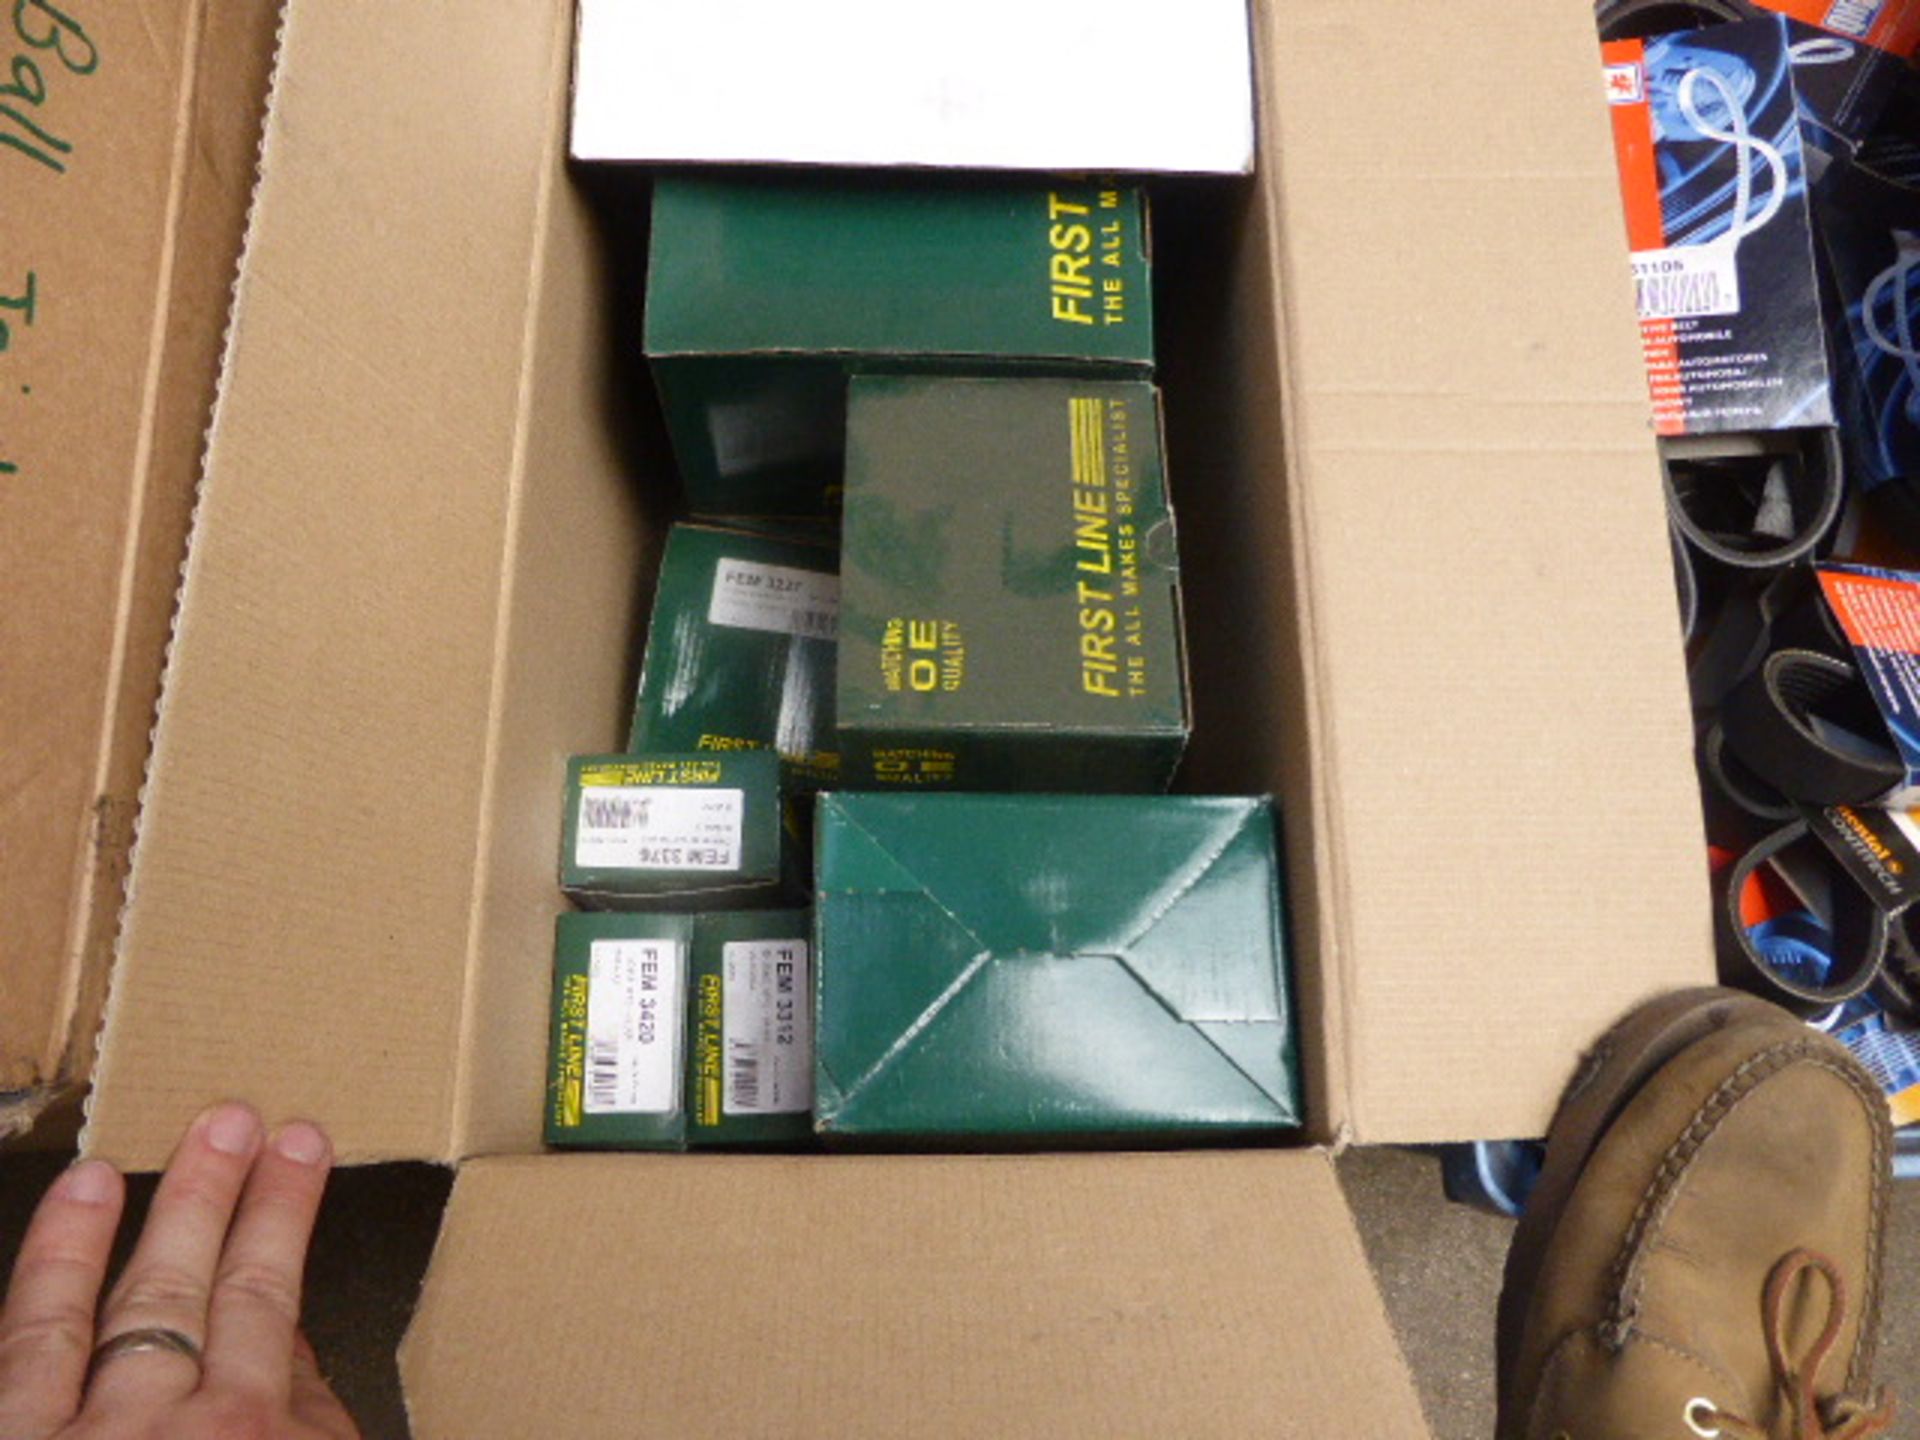 Box of First Line engine mounts for vehicles including Renault, Vauxhall, Citroen, Peugeot, etc